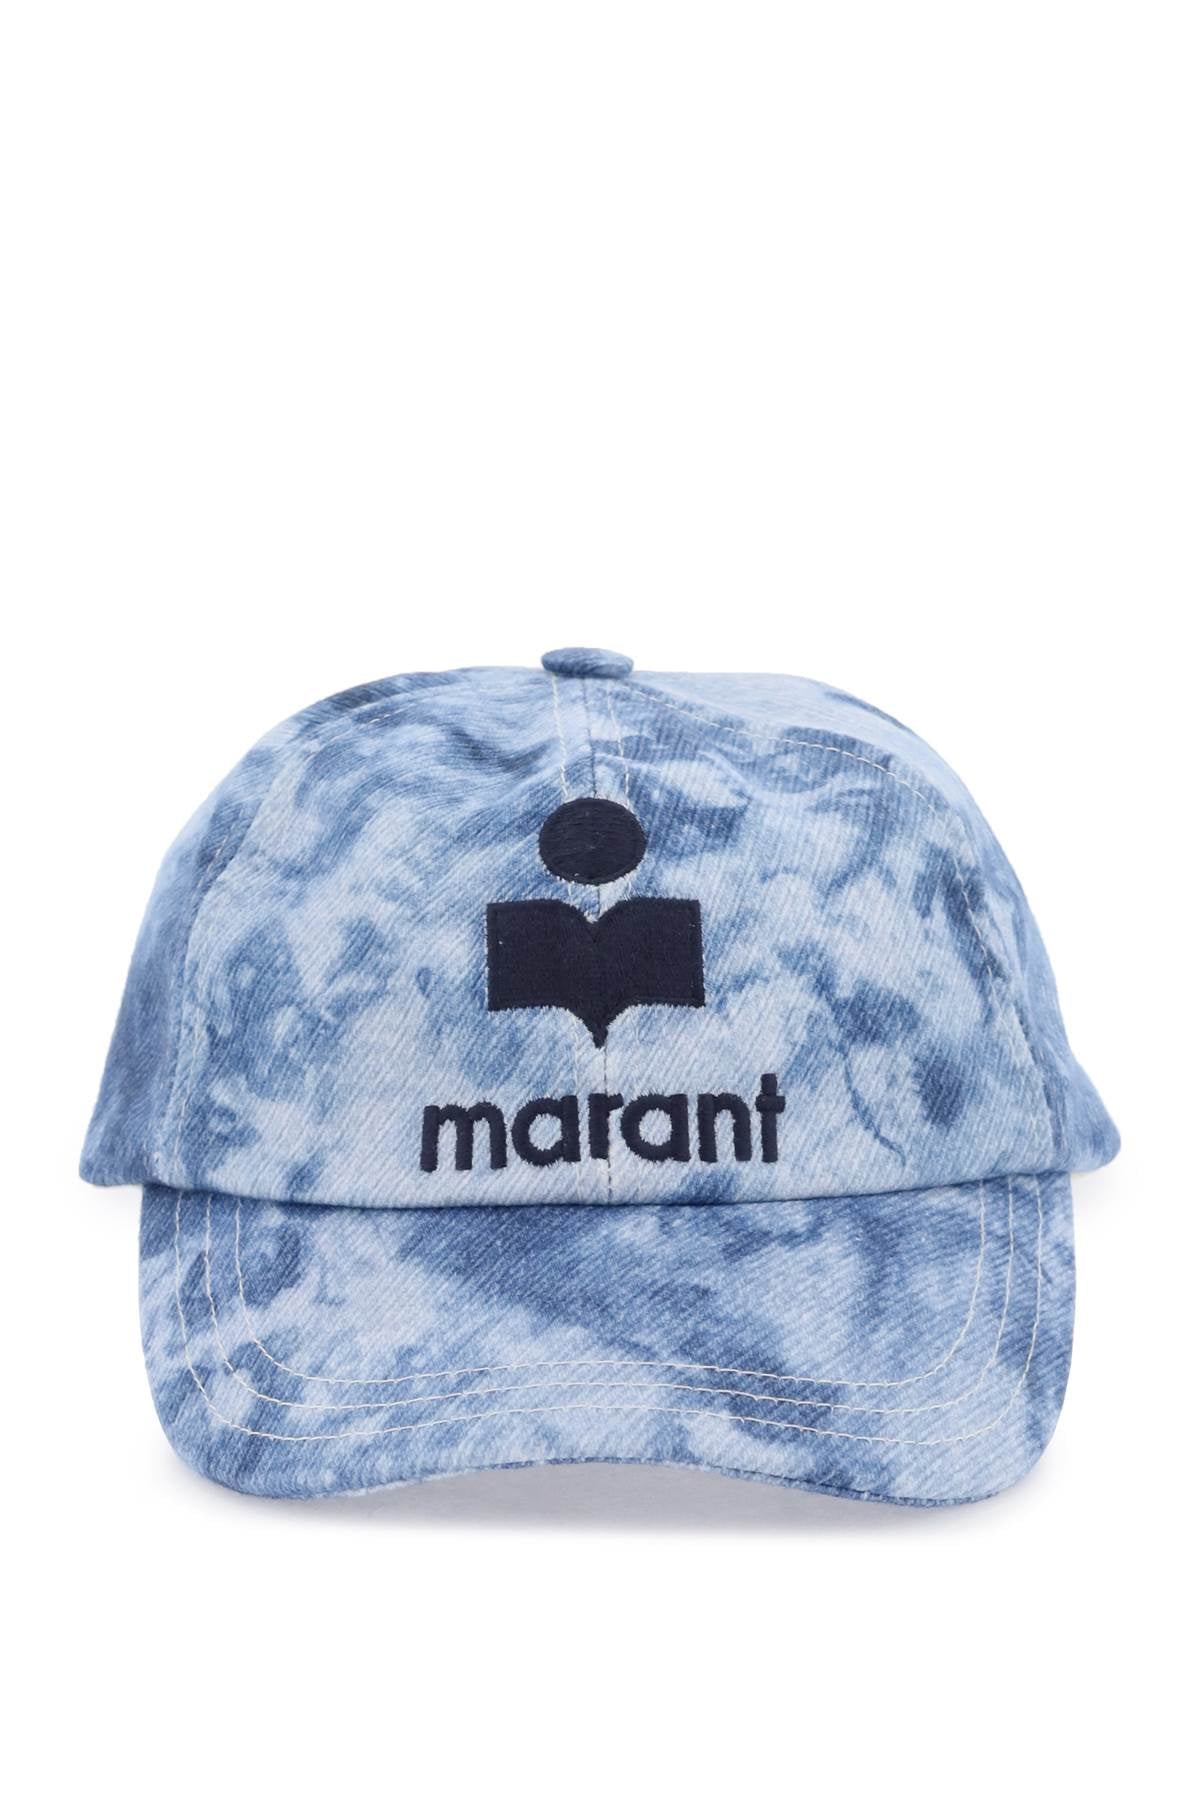 Isabel marant tyron baseball cap-women > accessories > scarves and gloves-Isabel Marant-57-Mixed colours-Urbanheer